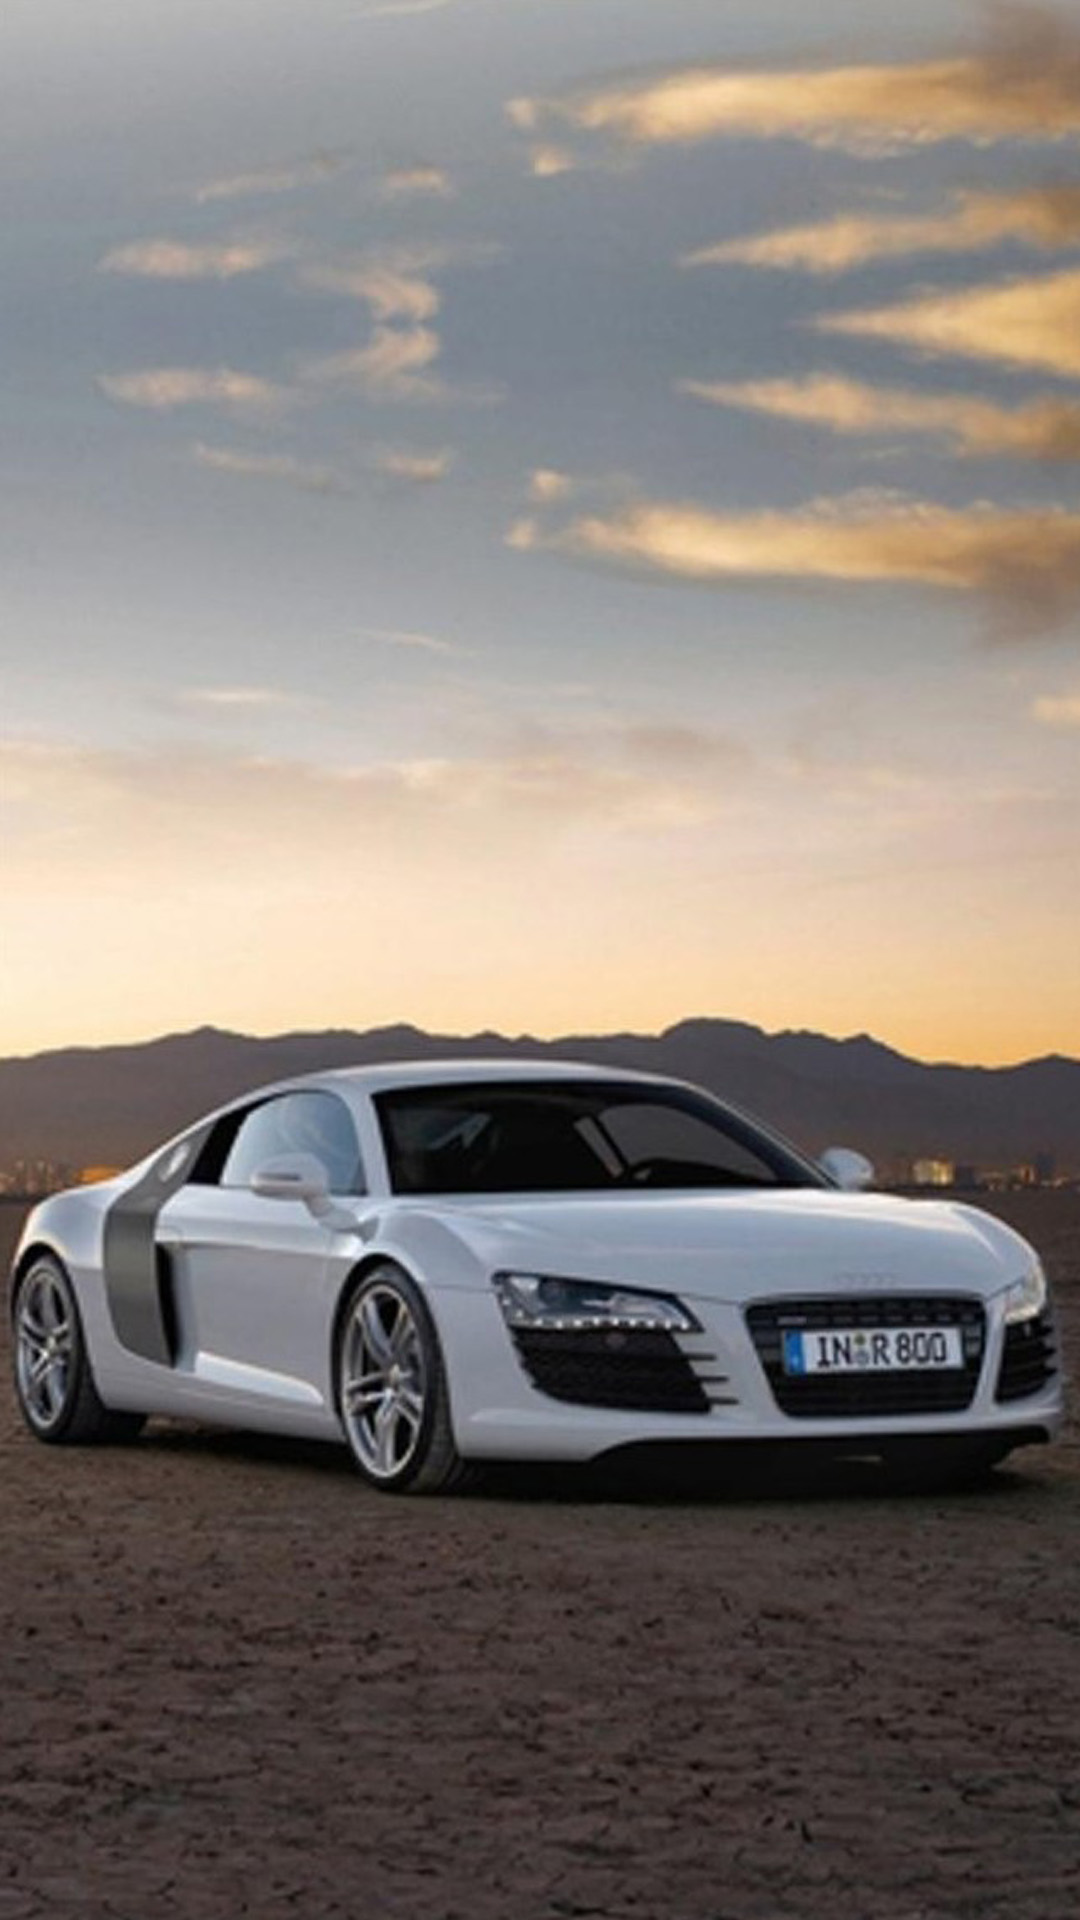 Download Free Photos Car Iphone - Audi R8 Iphone Background - 1080x1920  Wallpaper 